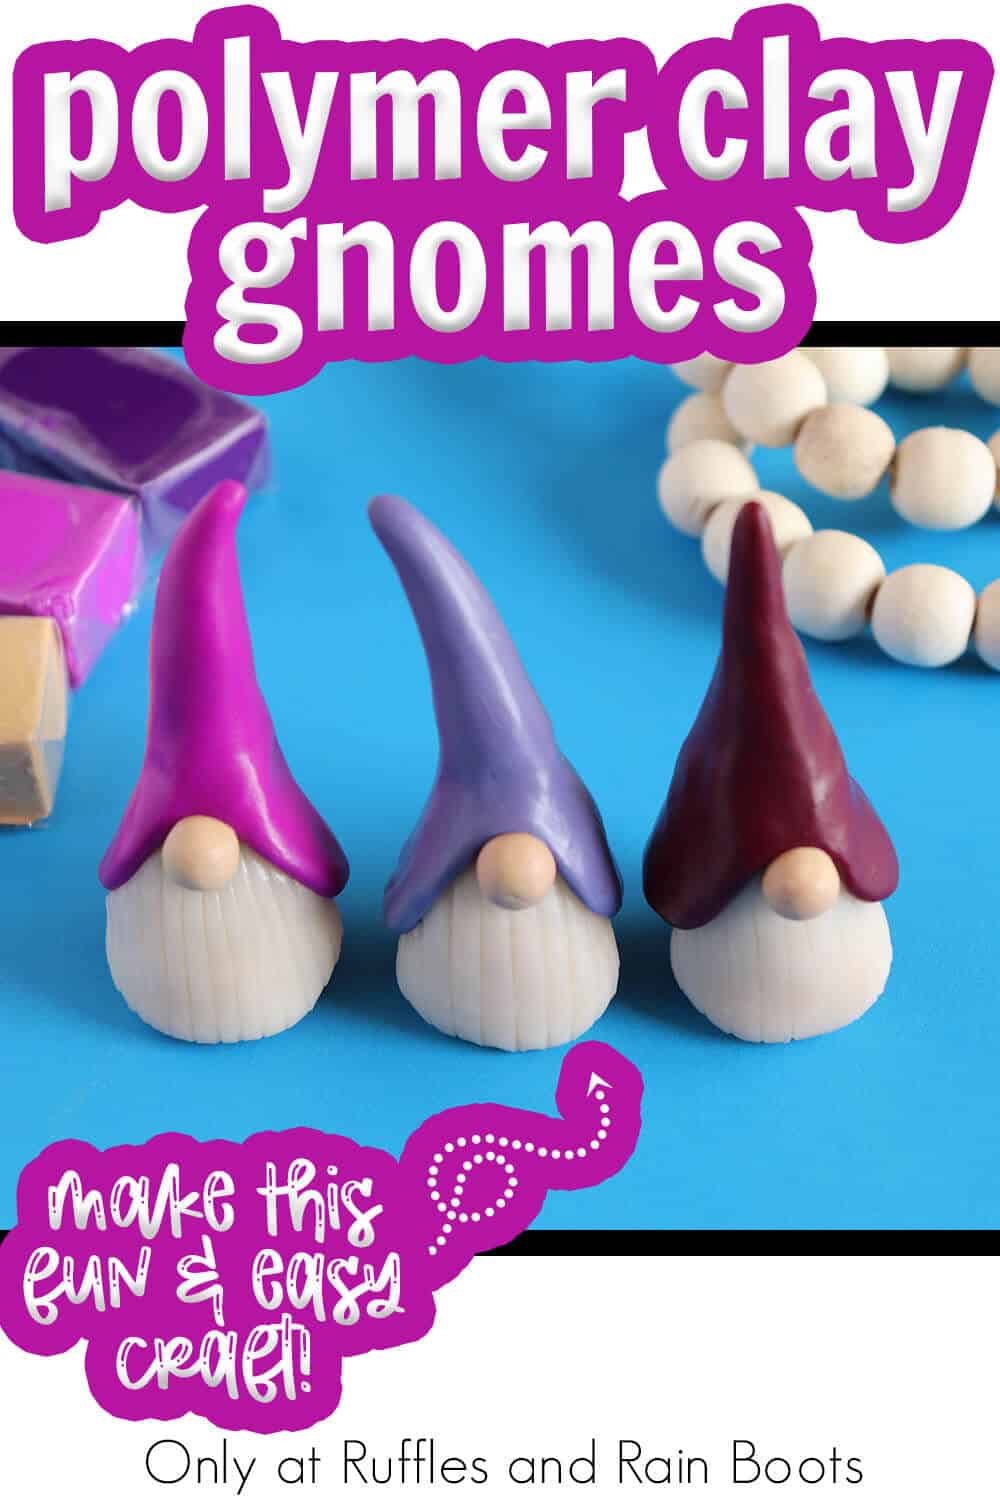 easy way to make clay gnomes with text which reads polymer clay gnomes make this fun & easy craft